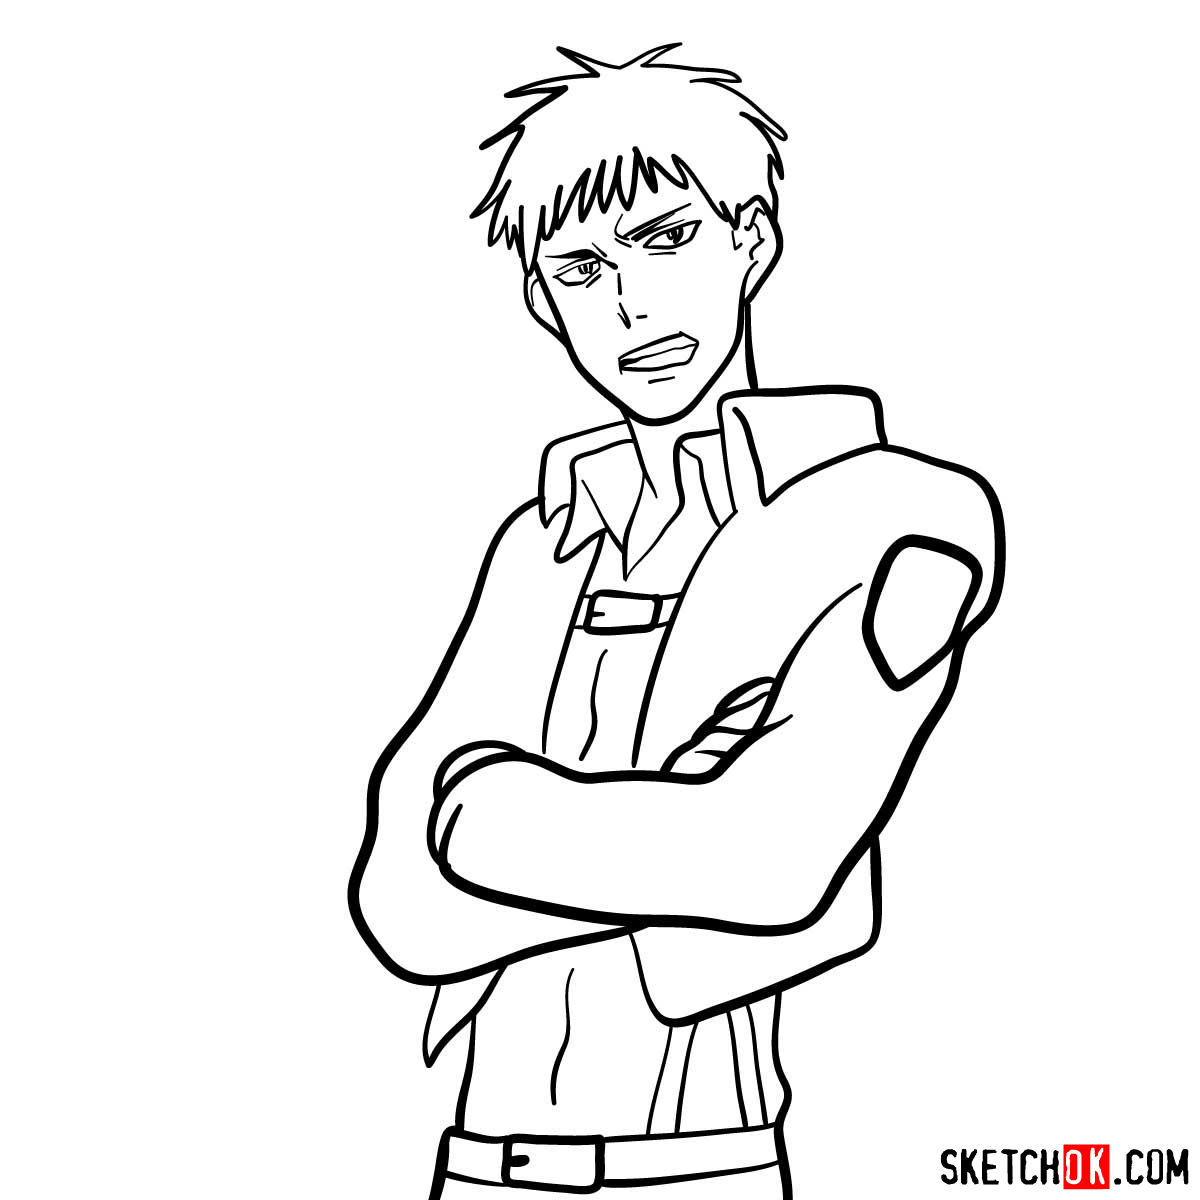 How to draw Jean Kirschtein | Attack on Titan - Sketchok easy drawing guides